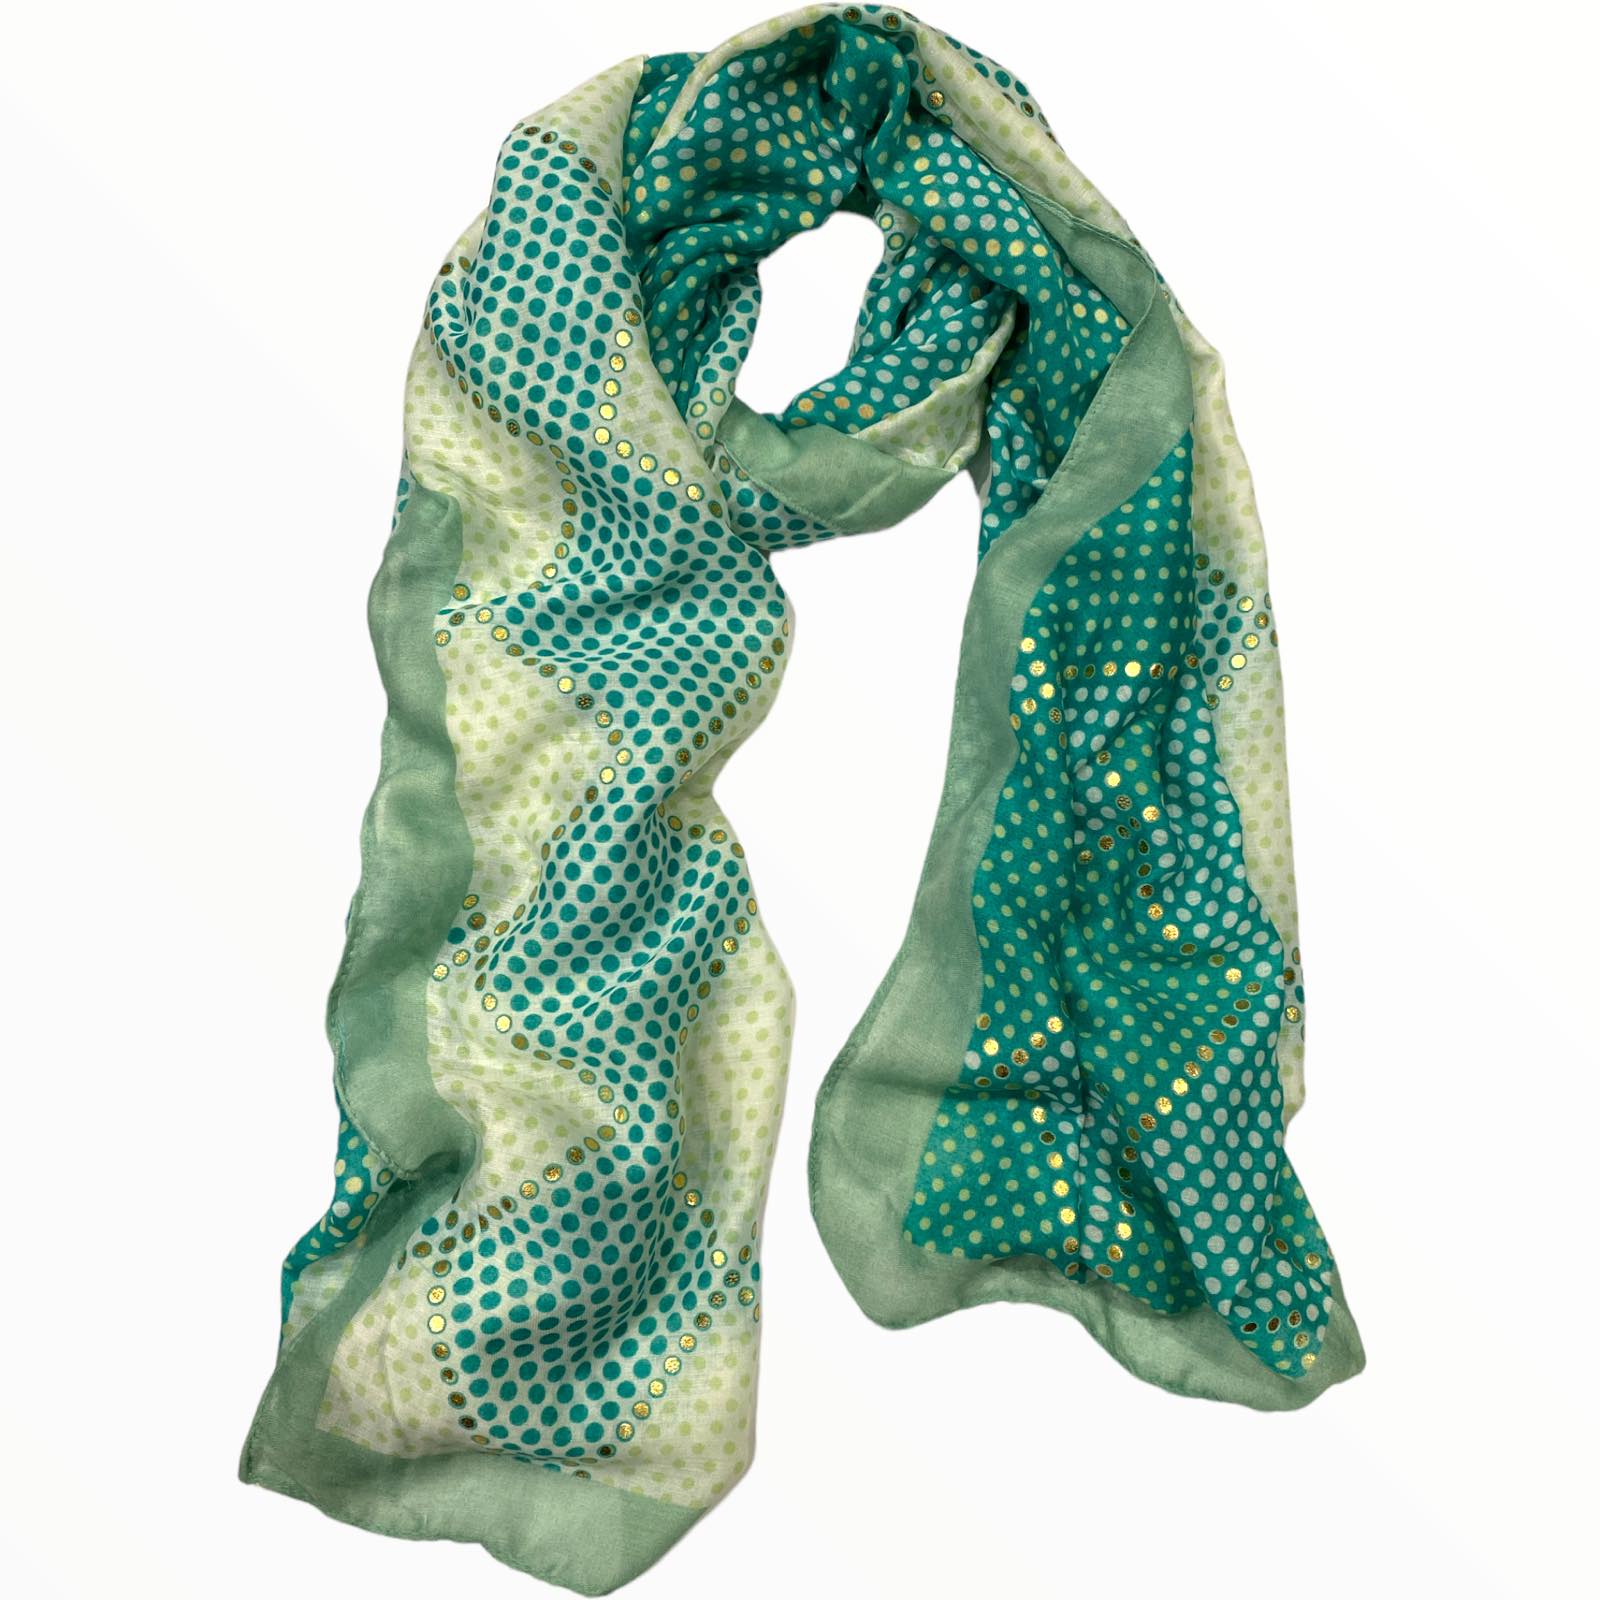 Emerald scarf with gold details